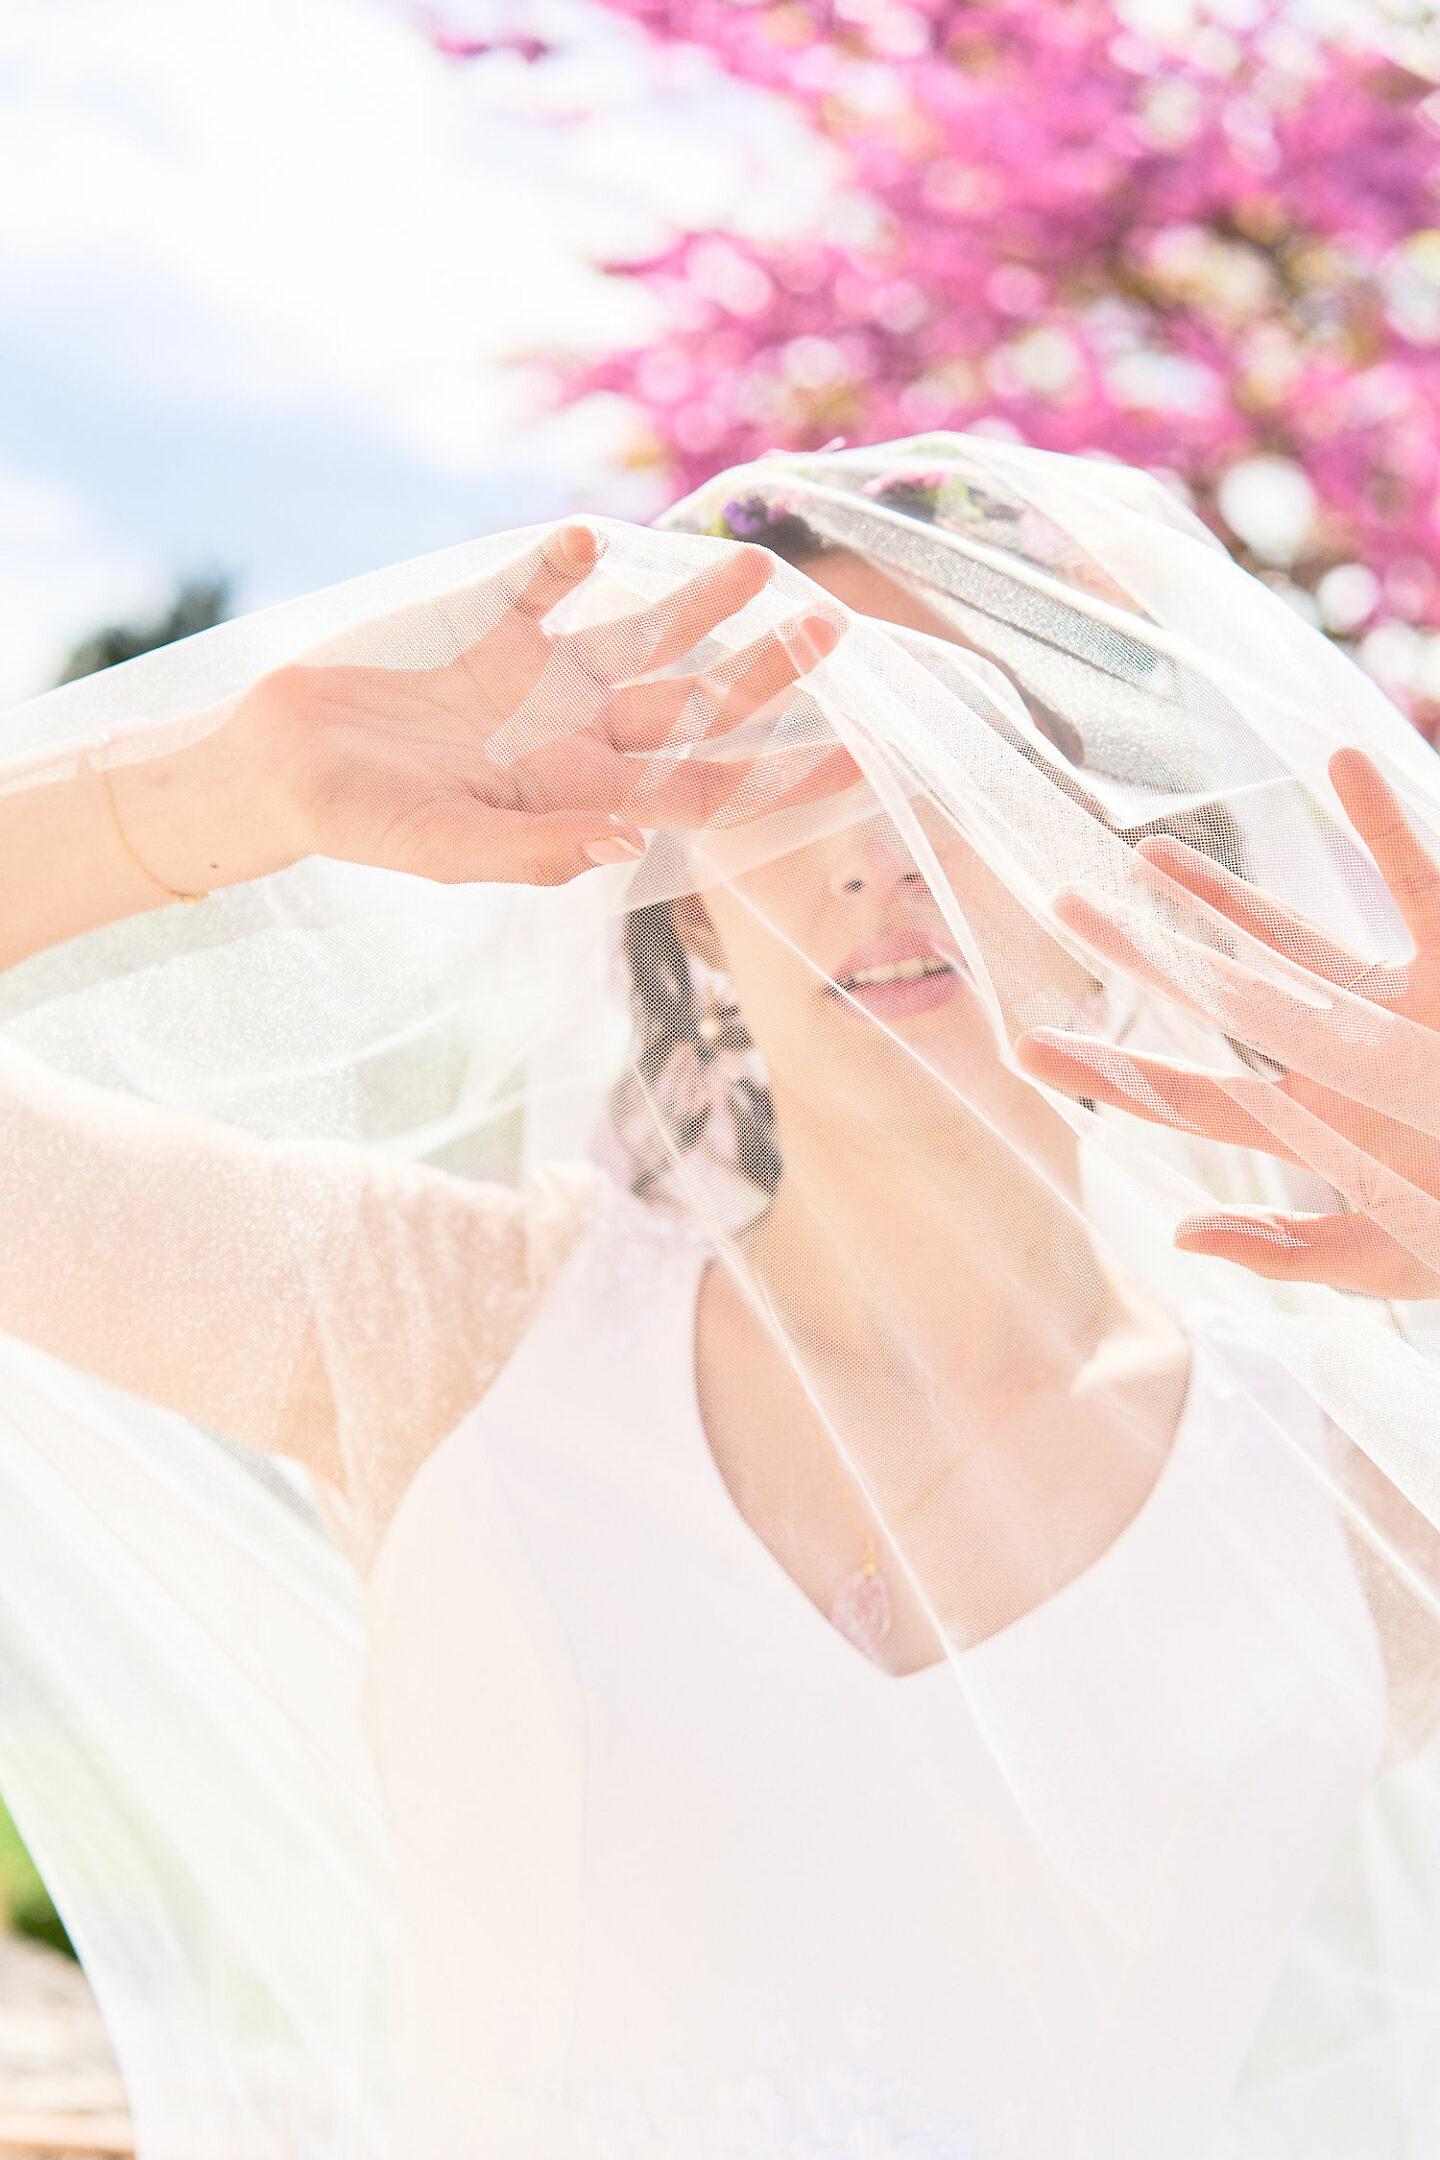 Albe Editions - Blog mariage - Wedding - Stéphanie - Les coulisses de Lili - Shooting inspiration 